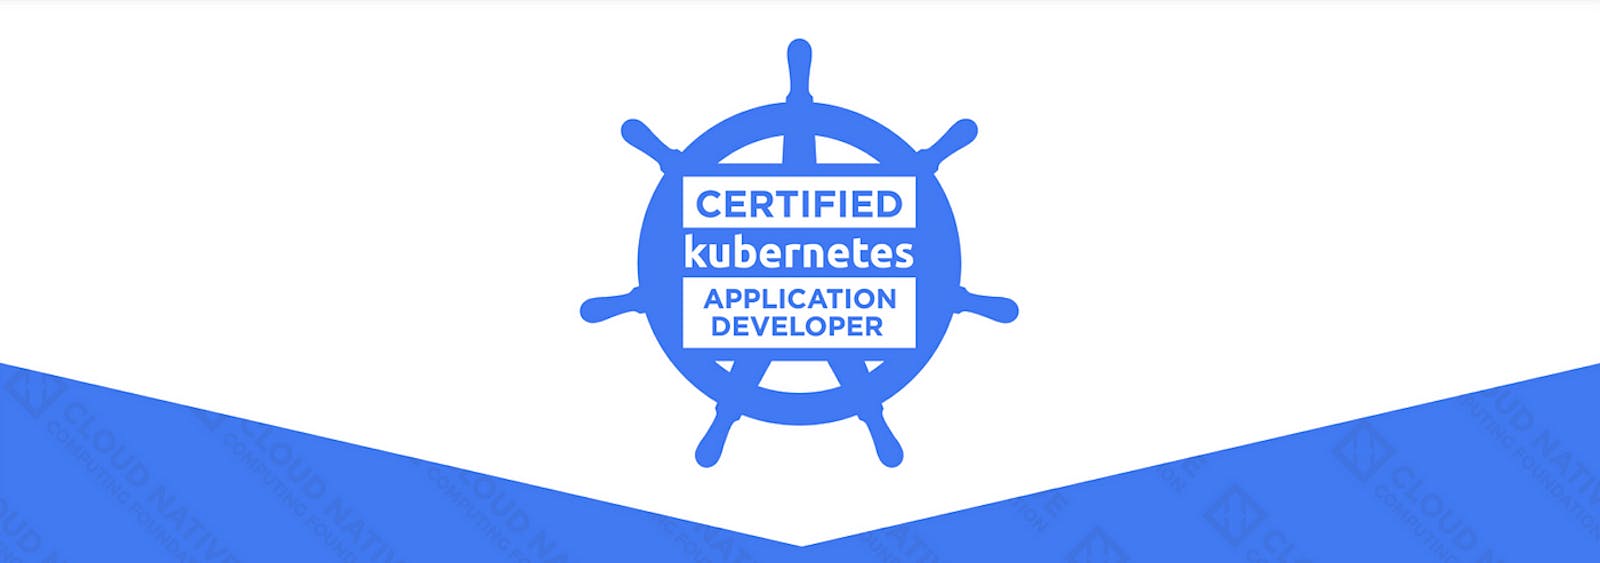 Certified Kubernetes Application Developer (CKAD) Program: An Introduction and In-depth Details